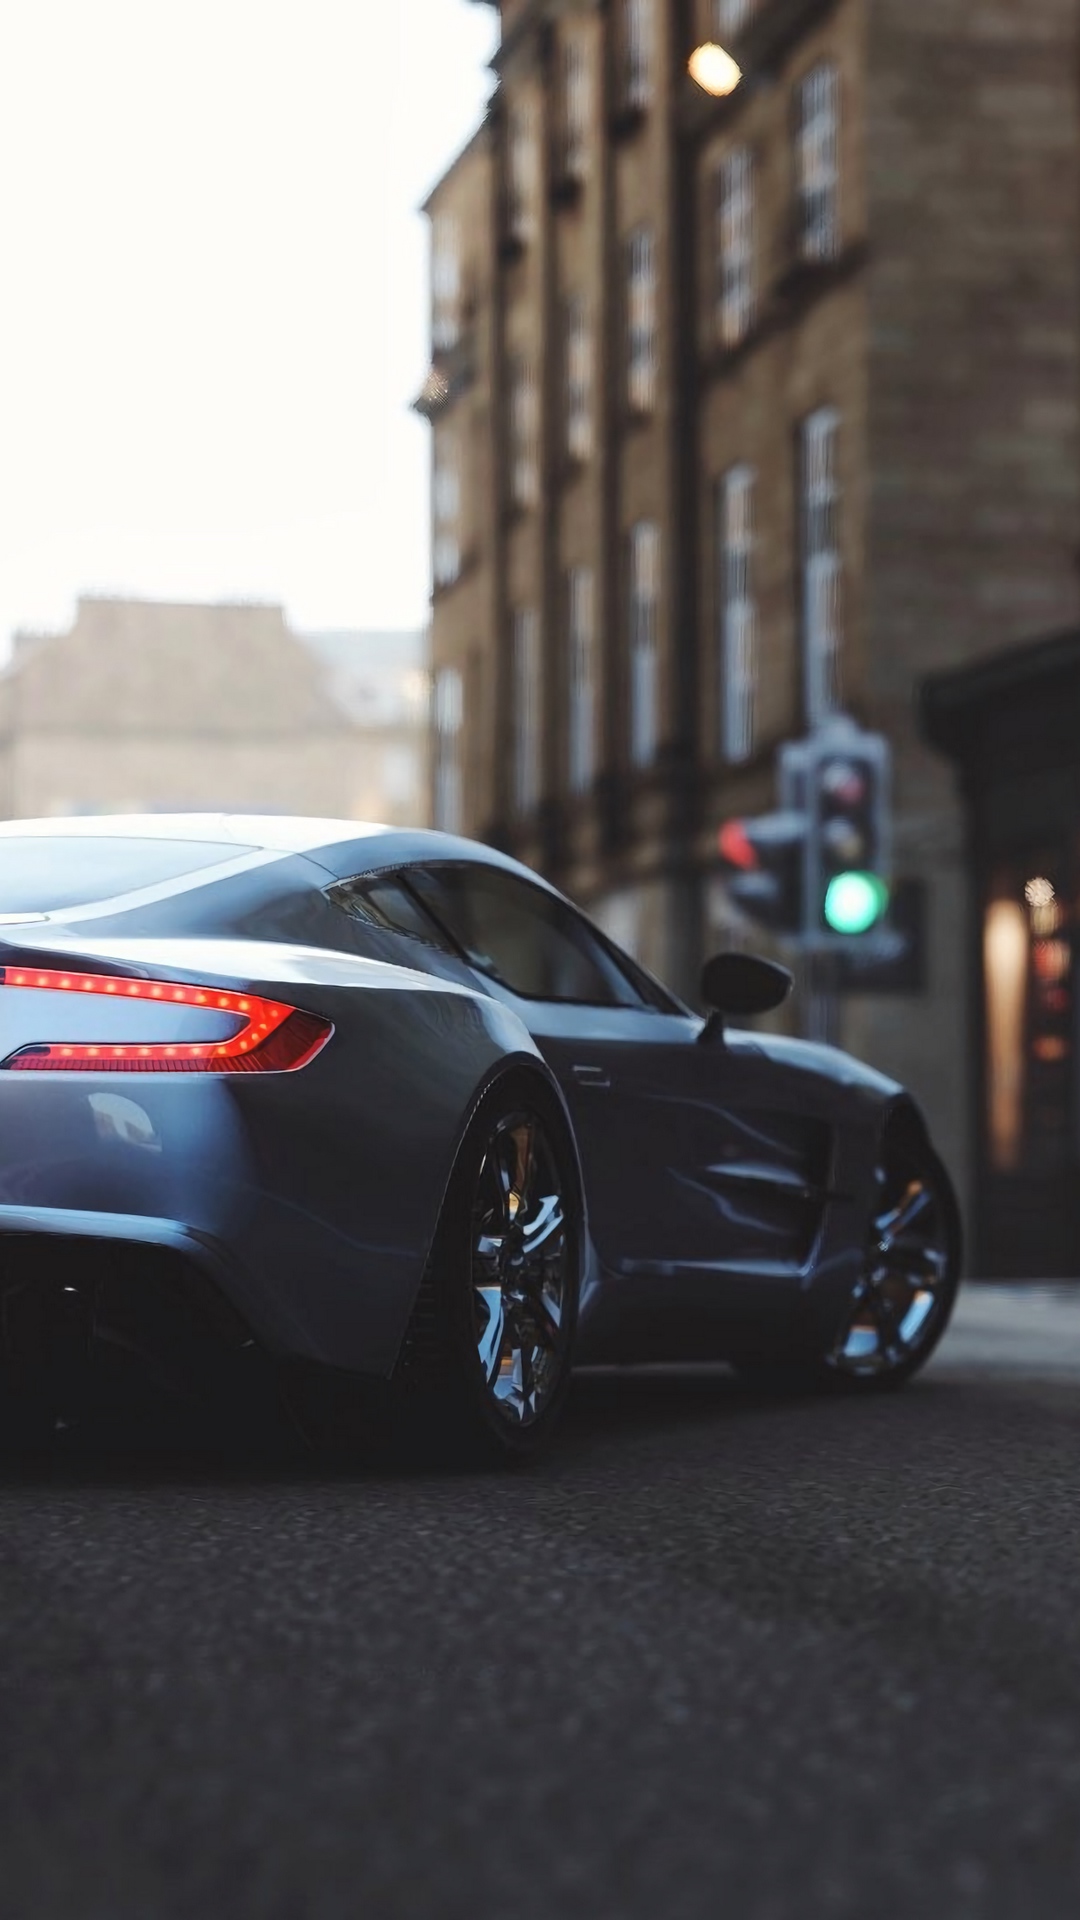 Aston Martin One-77 Phone Wallpaper by Paulo.hvo